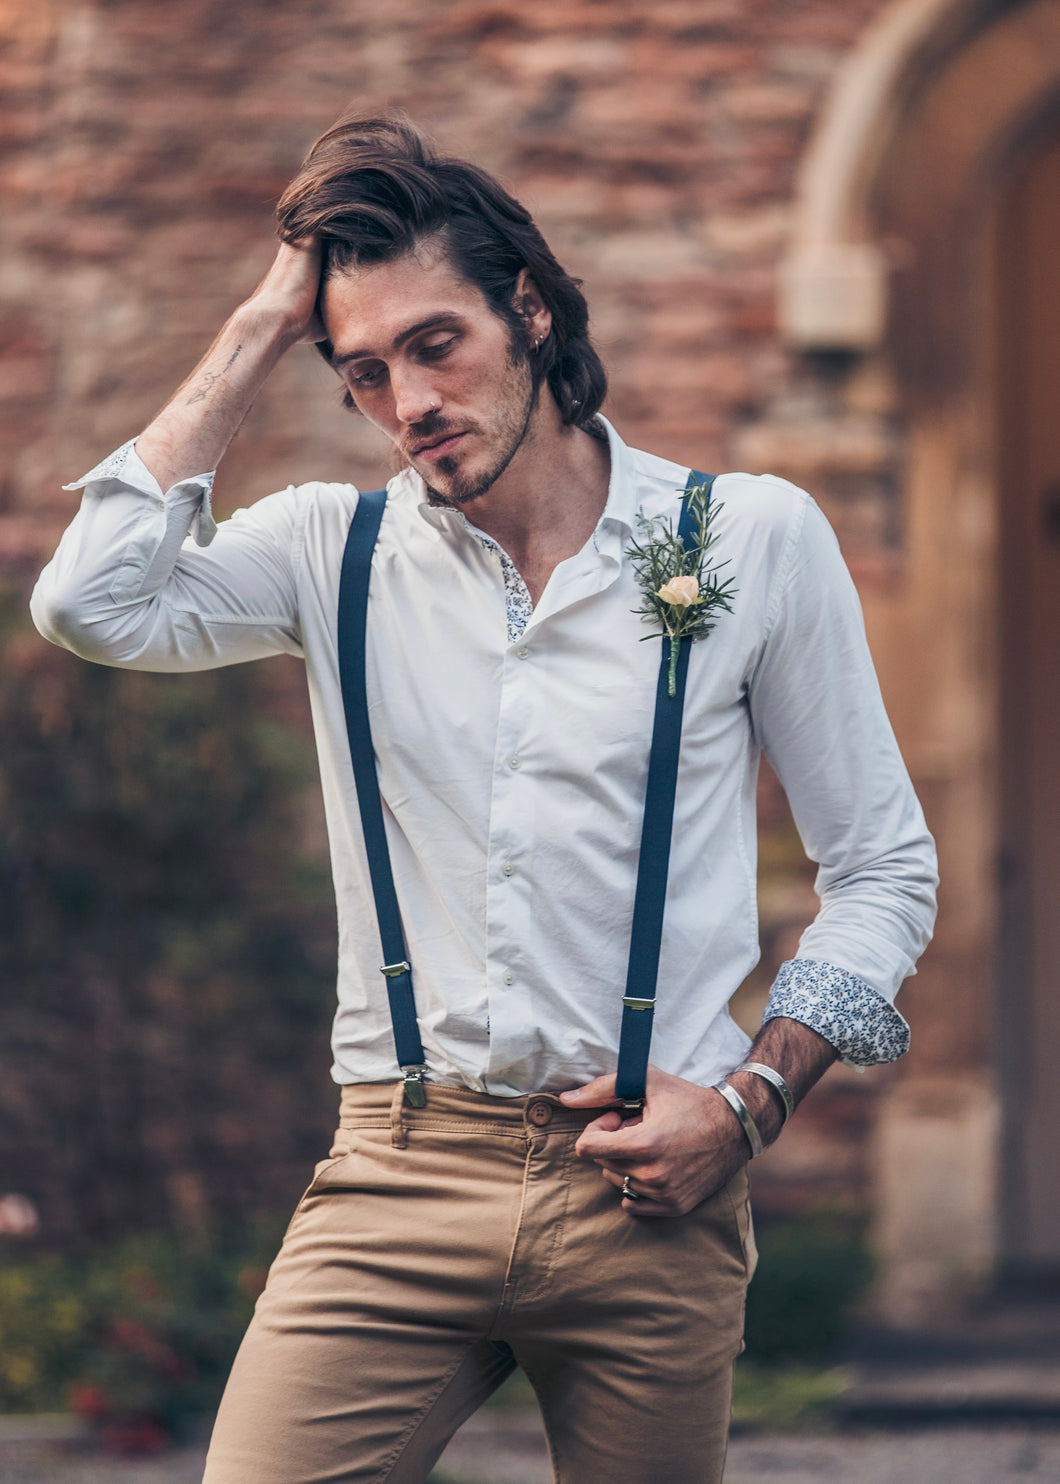 Boho groom looking disheveled, wearing SUAVE OWL White Shirt with chinos and braces.